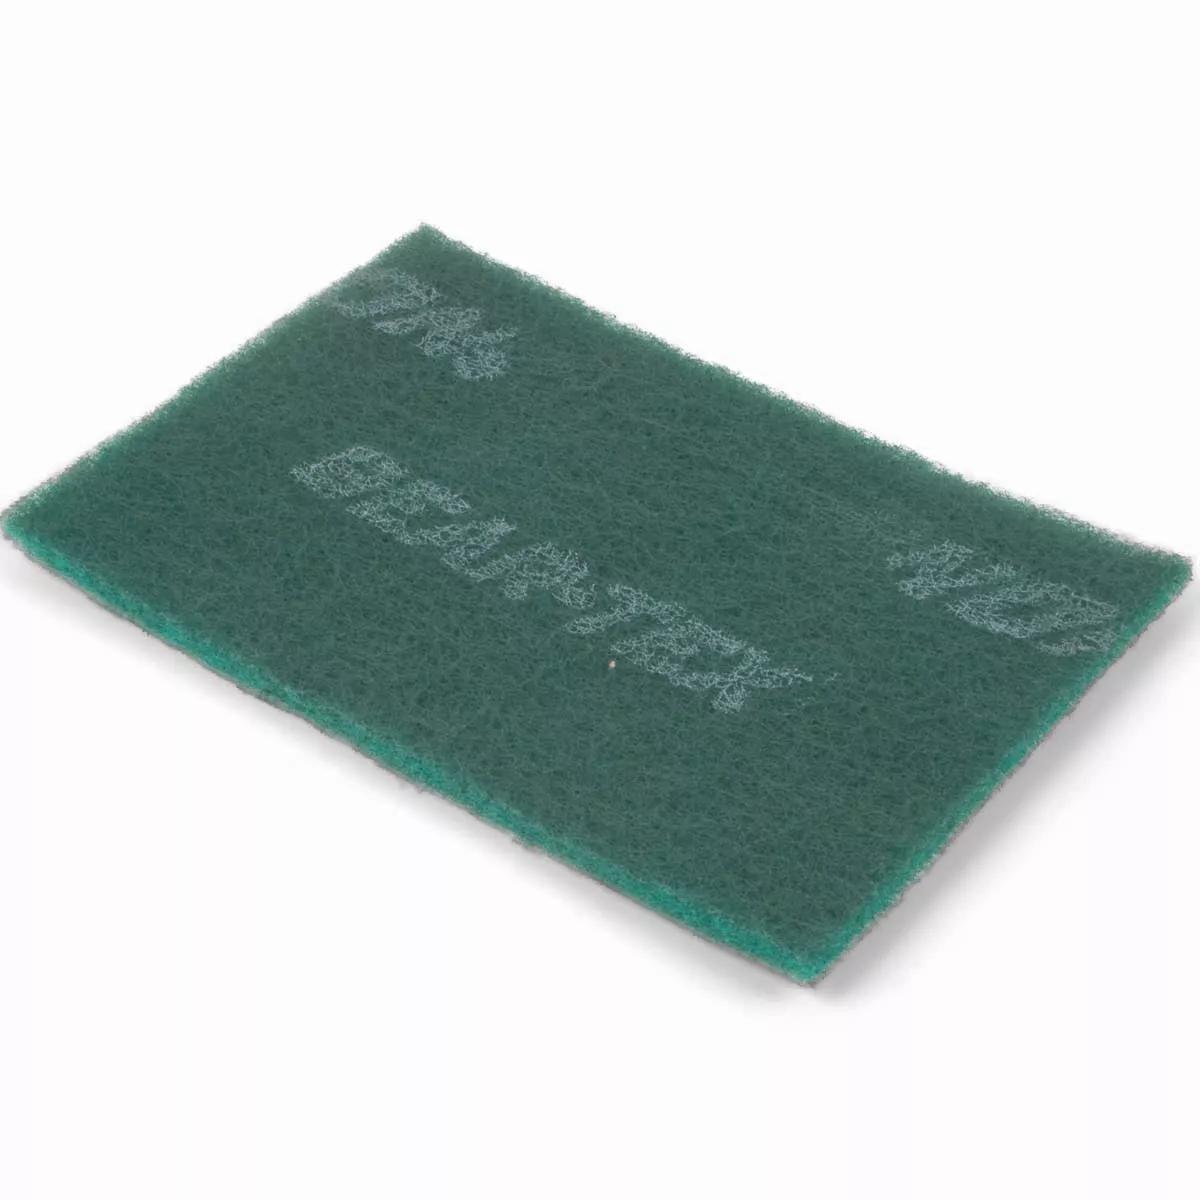 6" x 9" Scouring Green Bear-Tex Aluminum Oxide Surface Conditioning Hand Pad